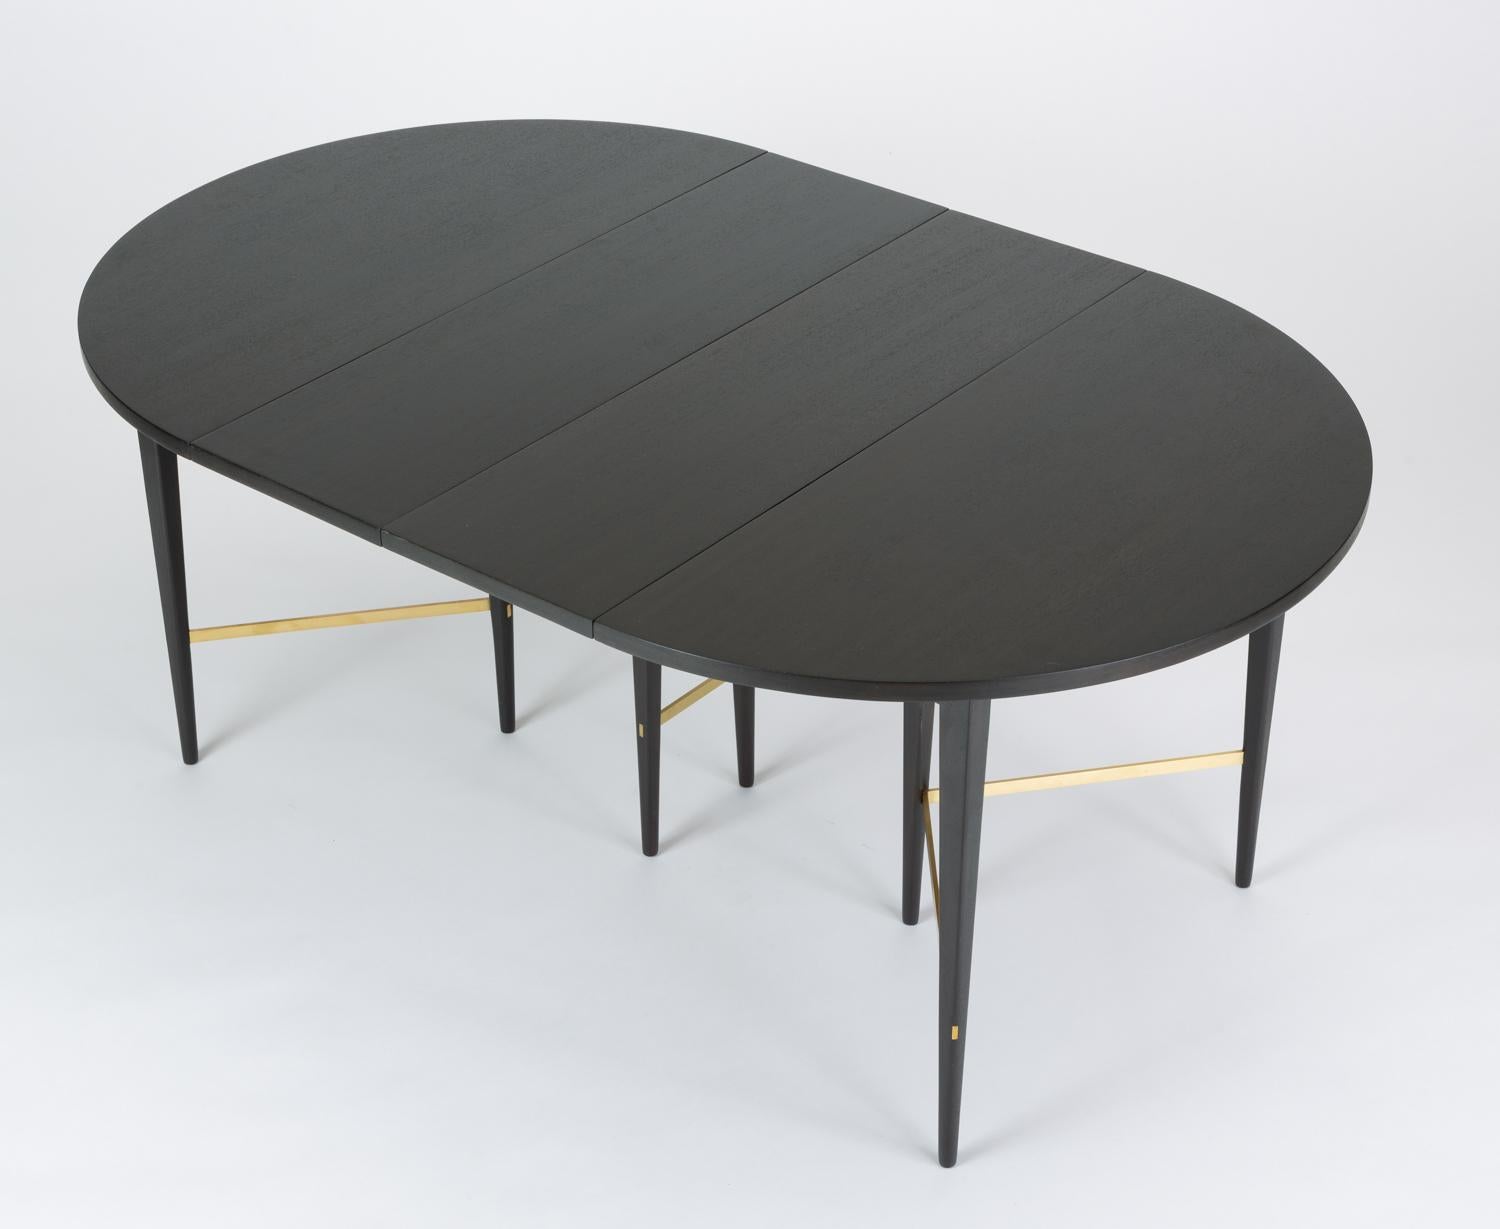 Ebonized Dining Table with Six Leaves by Paul McCobb for Calvin Furniture 1